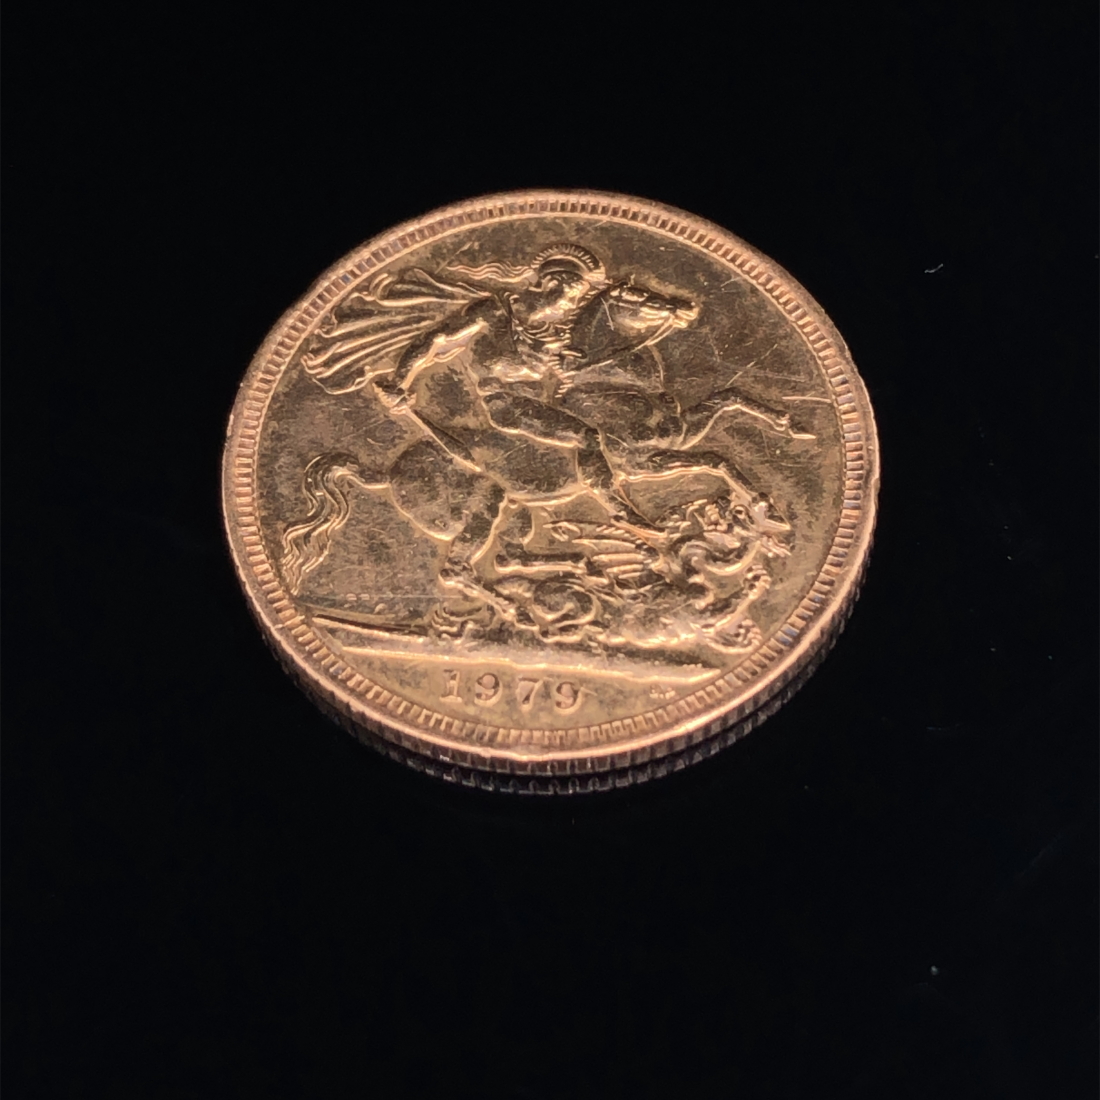 A 22ct GOLD 1979 FULL SOVEREIGN COIN.